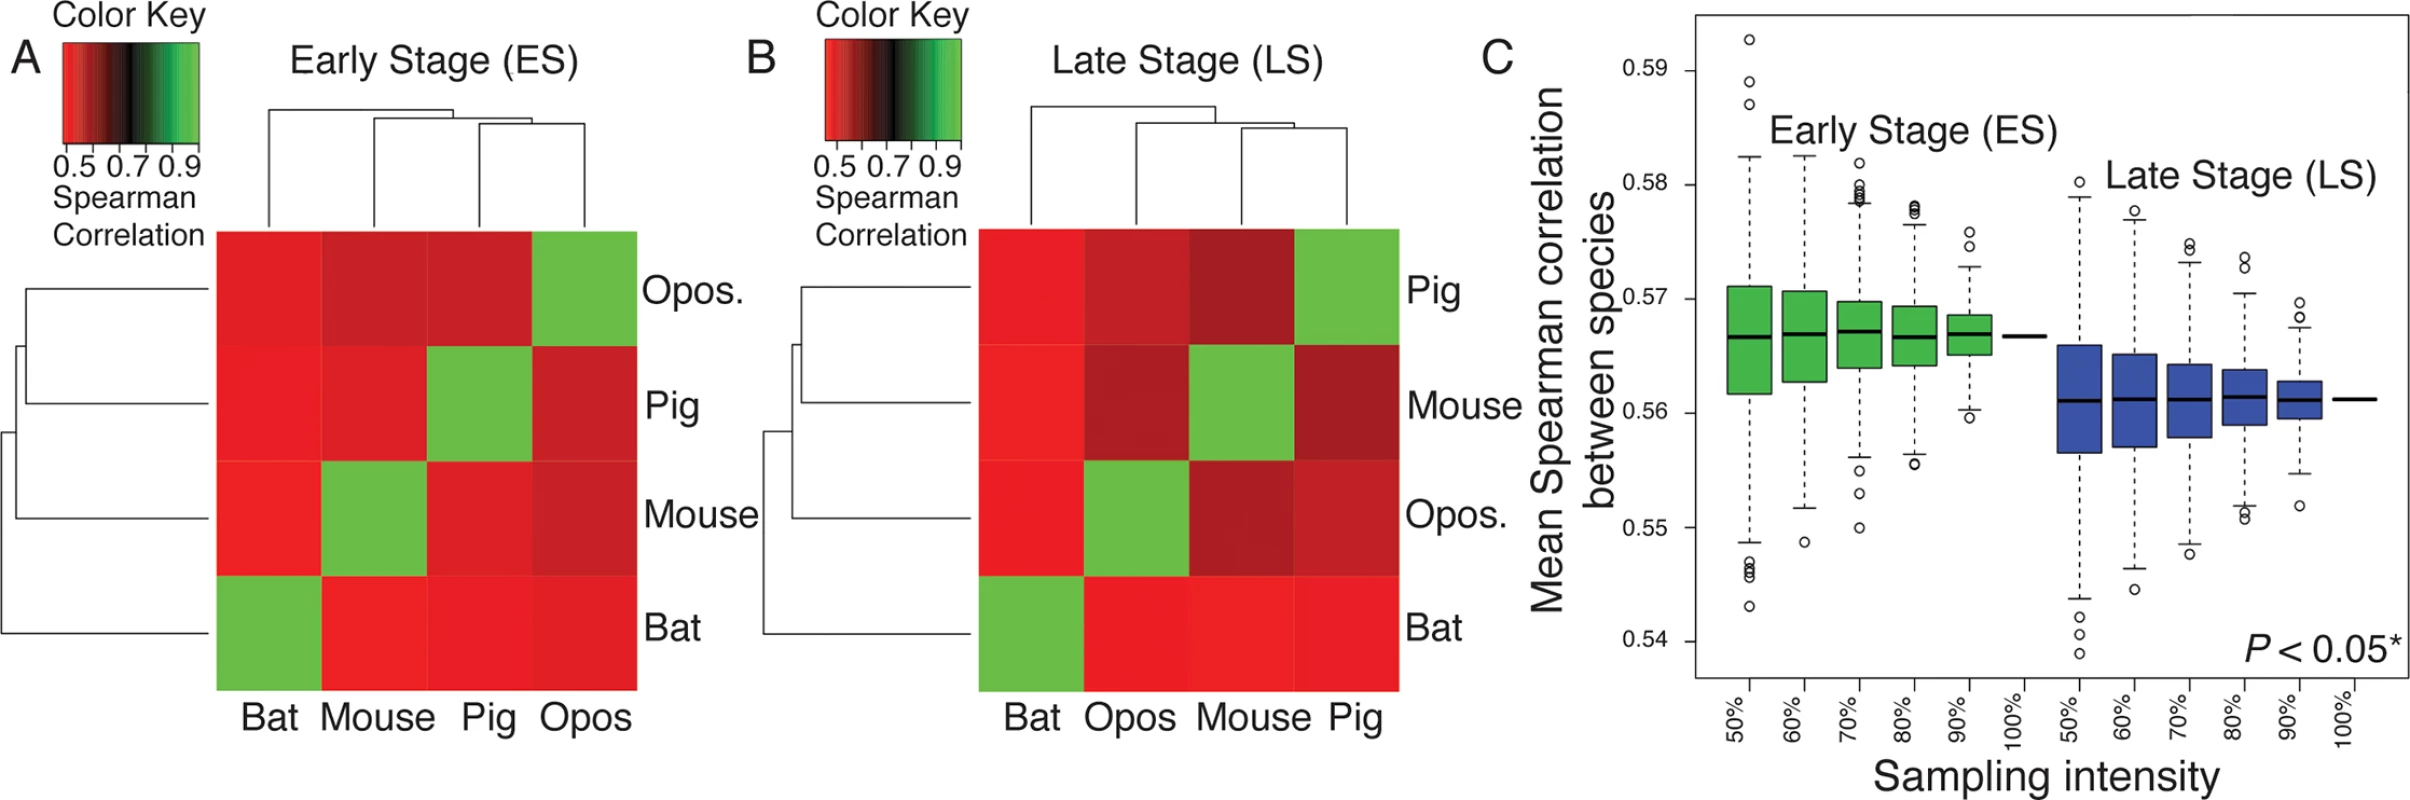 Overall patterns of gene expression are positively correlated among all examined mammals during the Early (ES; A) and Late (LS; B) stages of limb development.